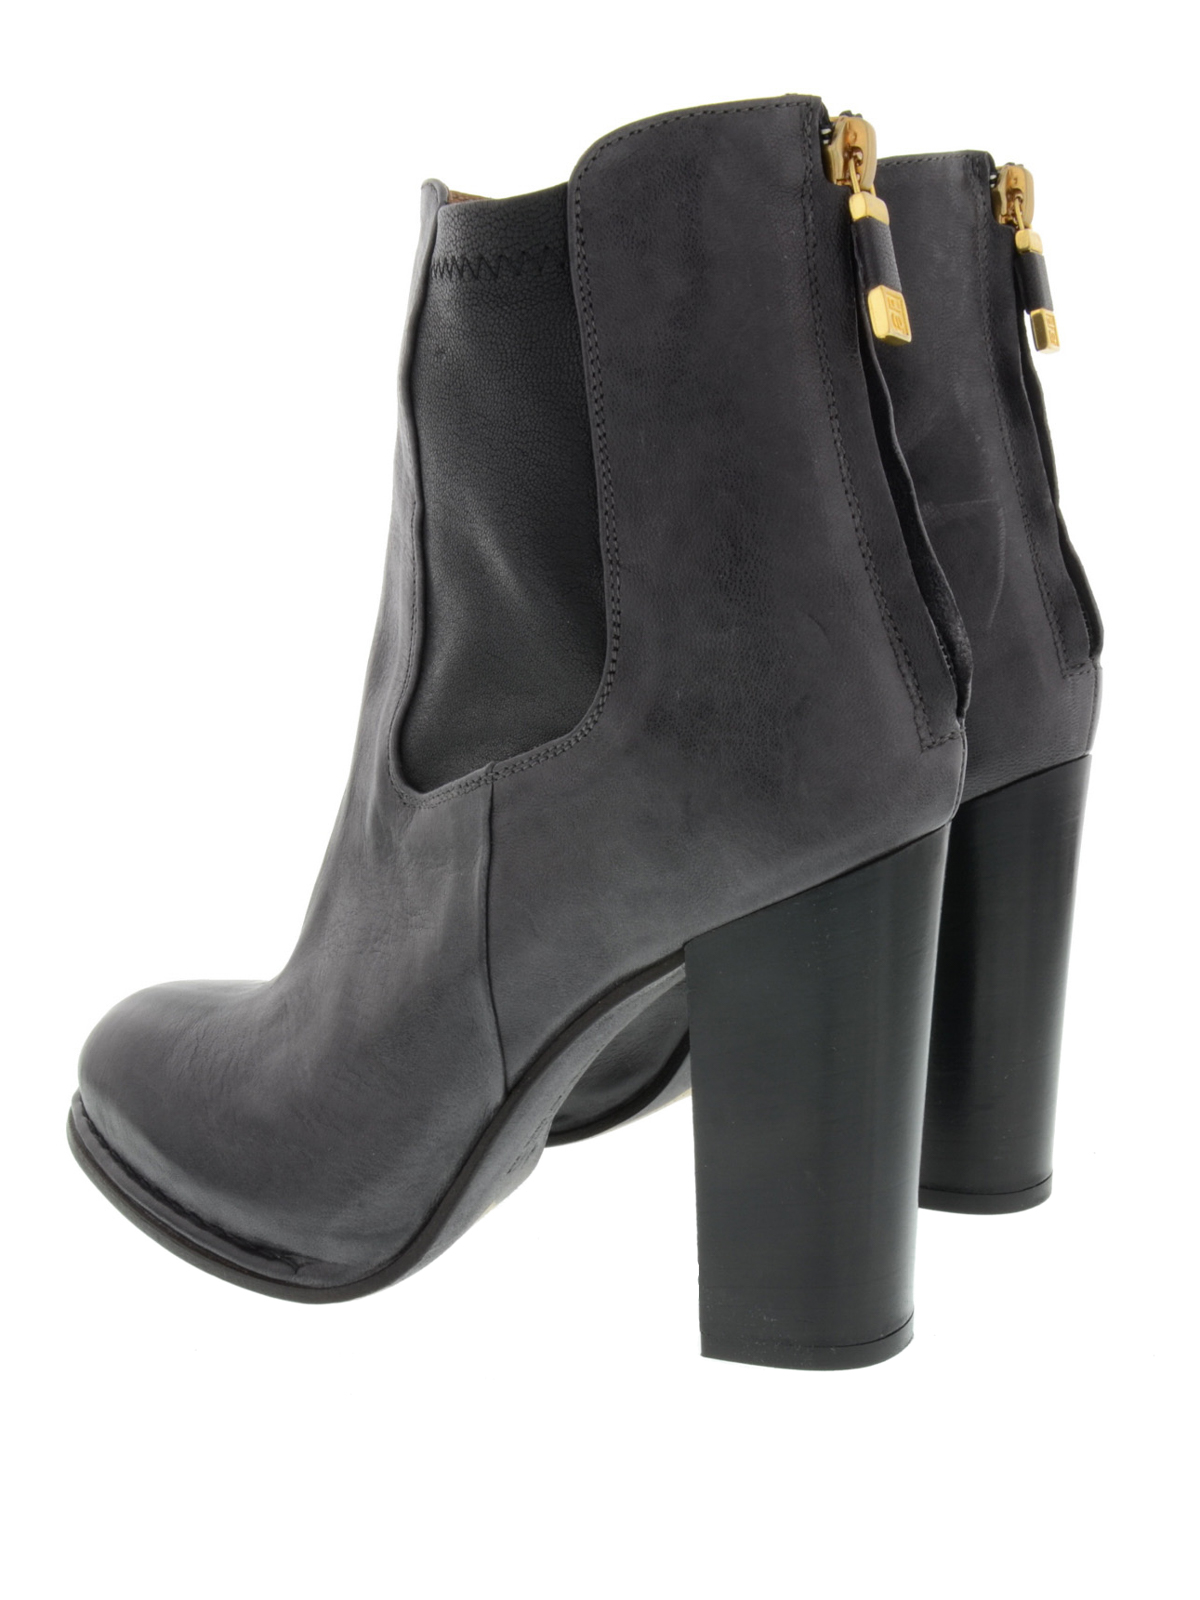 boots Alberto Fermani Rear zip leather ankle boots - REB004NERO